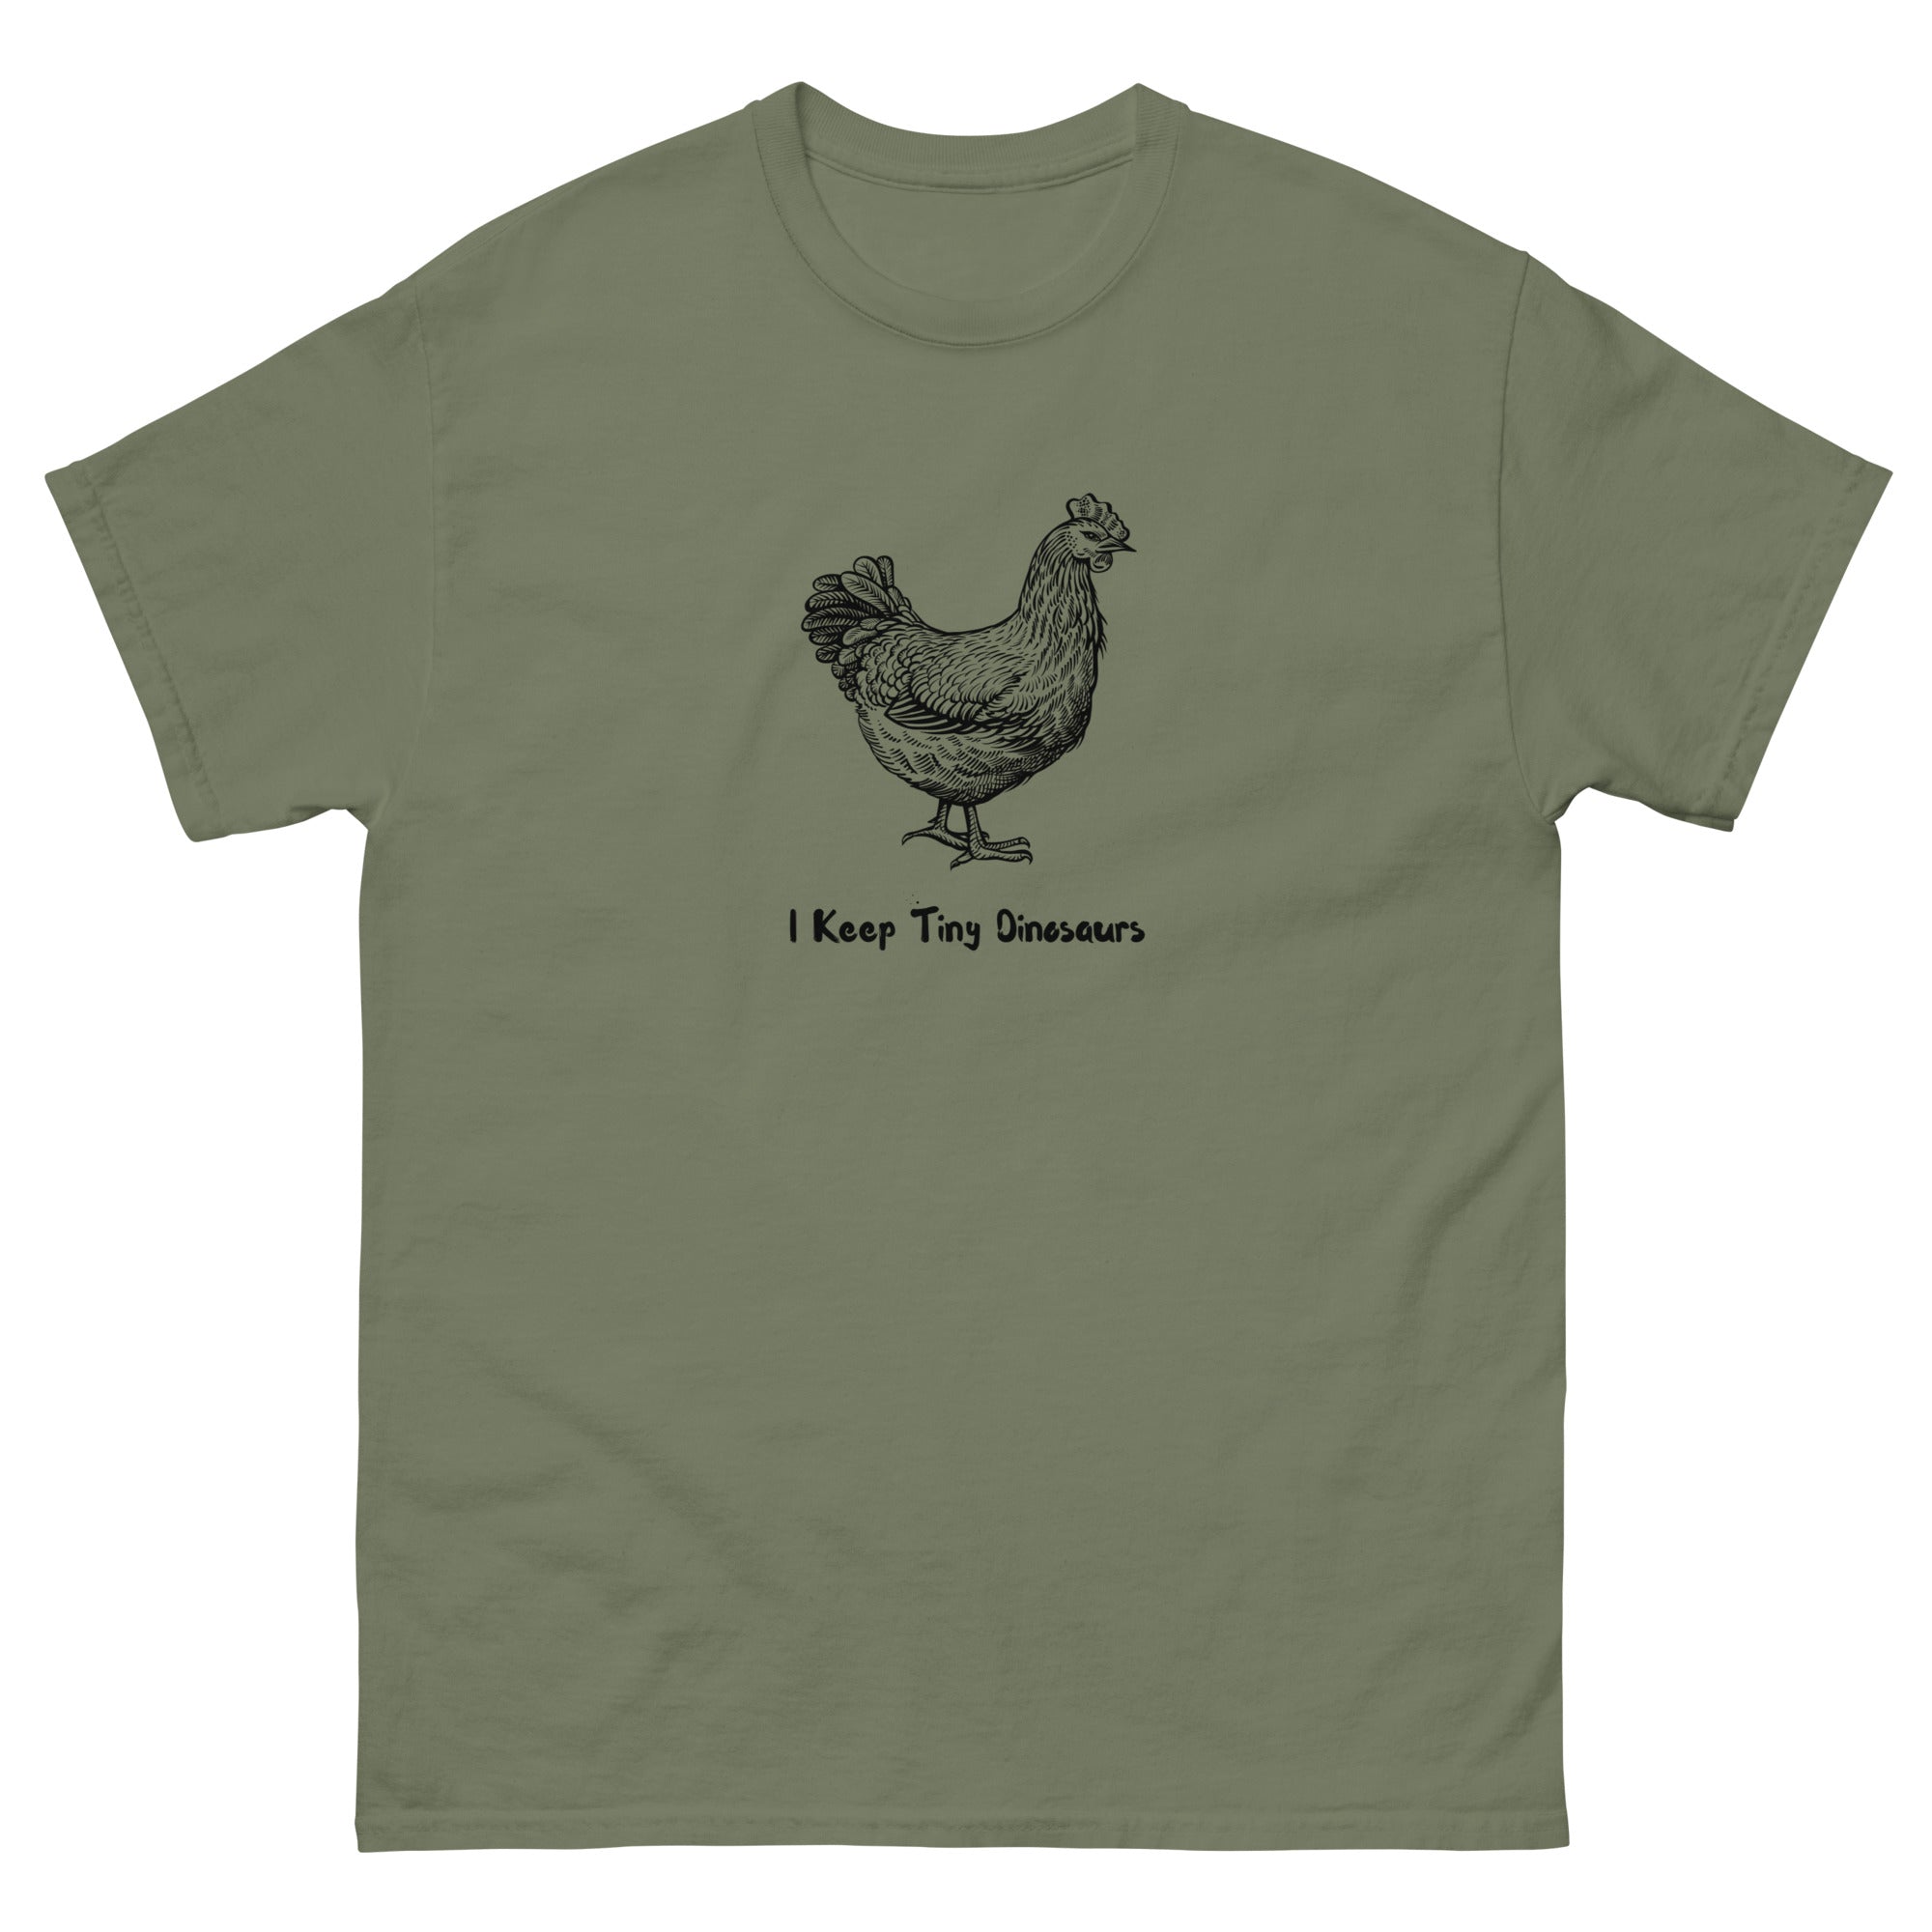 Tiny Dinosaurs Unisex Classic Tee - Cluck It All Farms